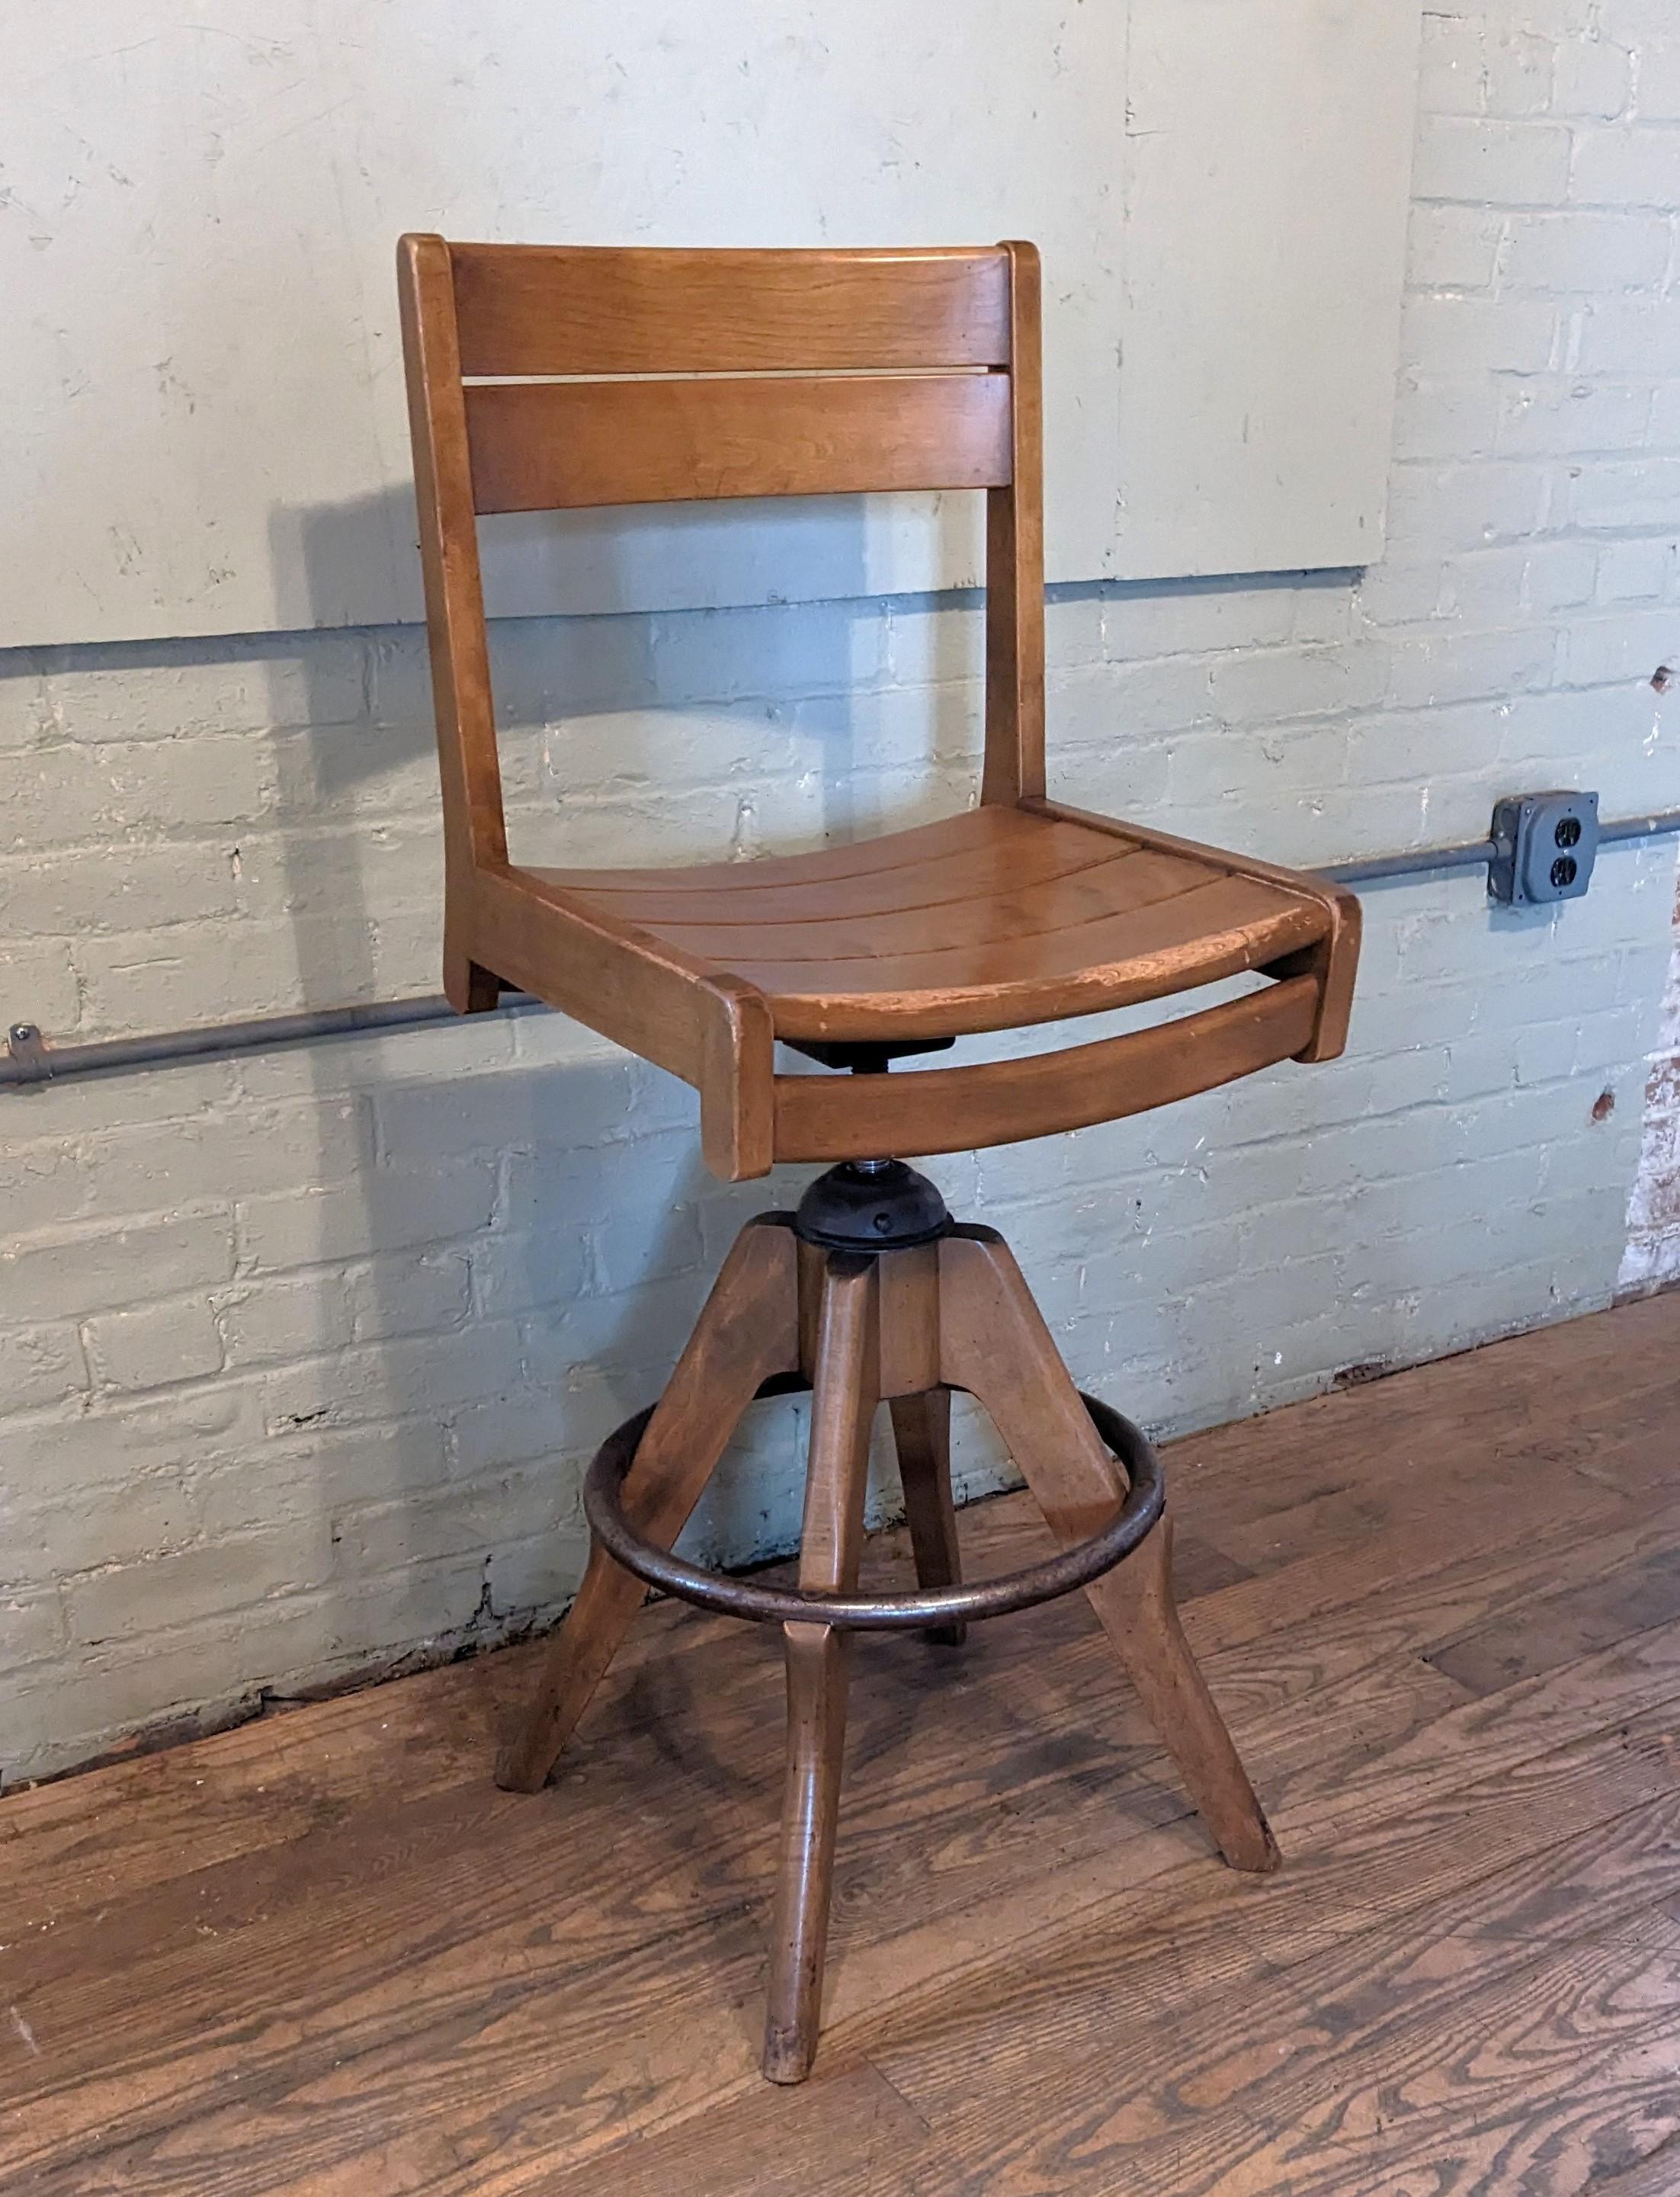 Adjustable maple drafting stool

Overall dimensions: 17 1/2